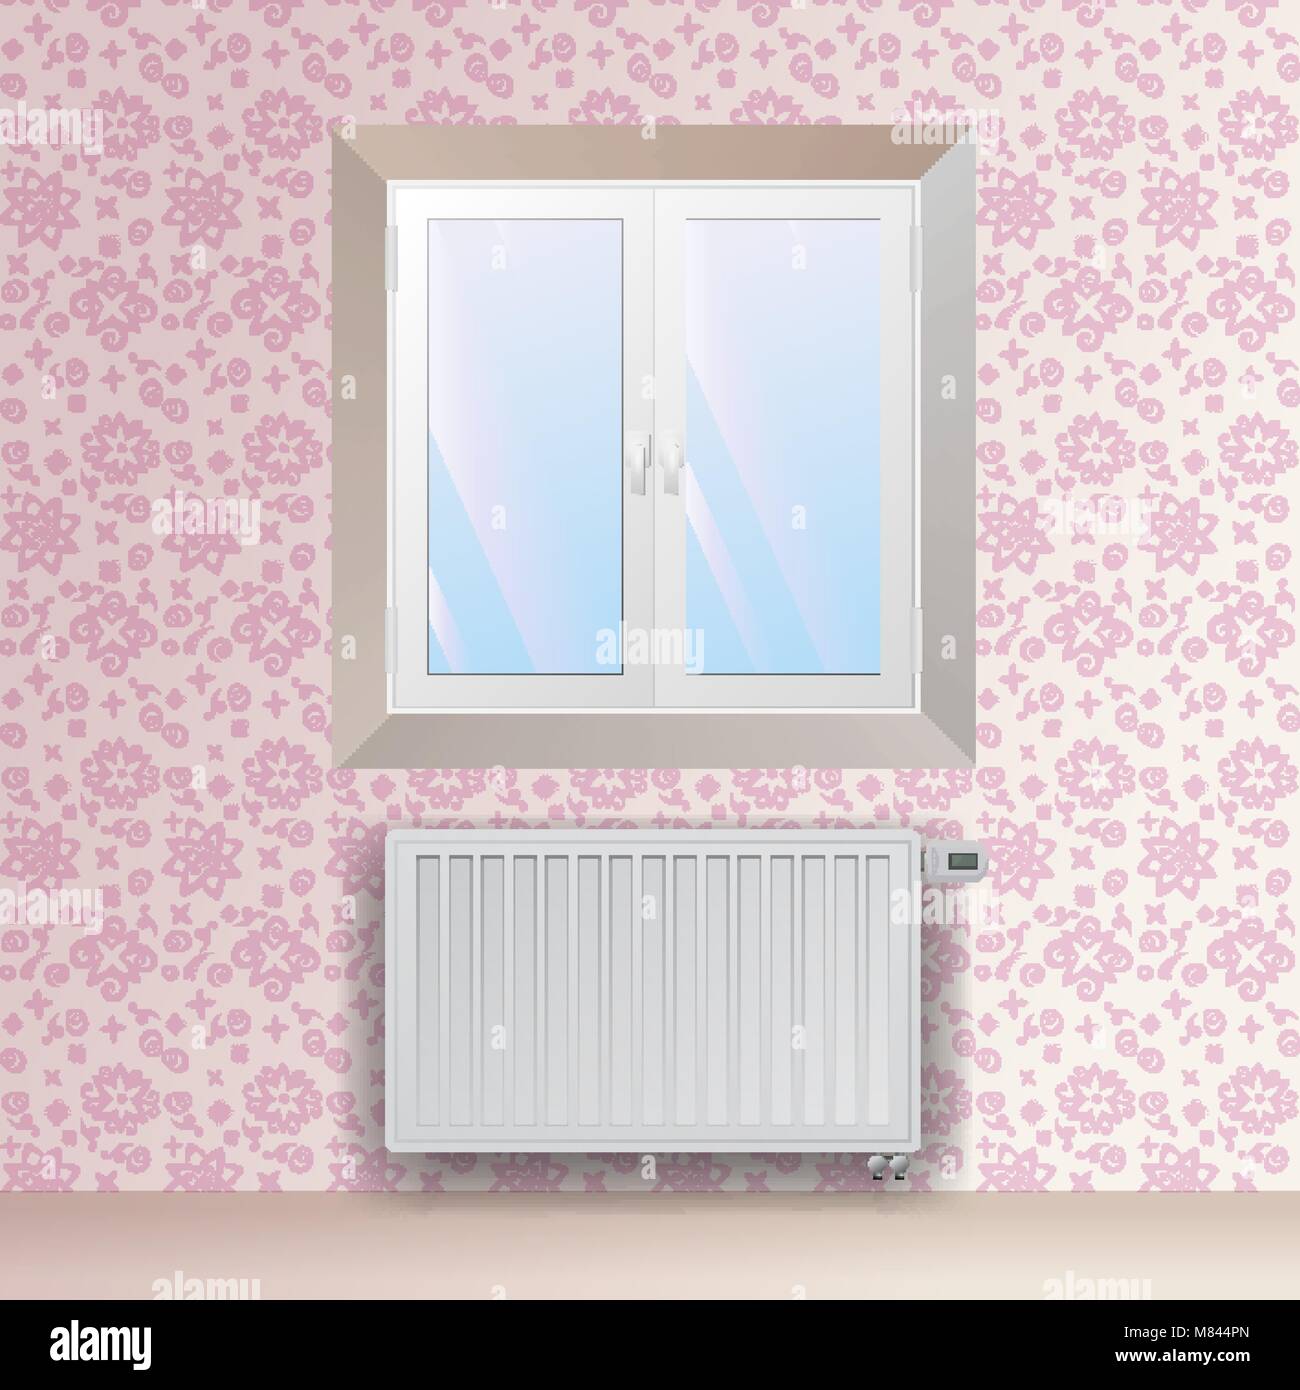 Steel panel radiator under the window. Heating equipment with electronic thermostatic head. Vector wallpaper with floral pattern. Stock Vector